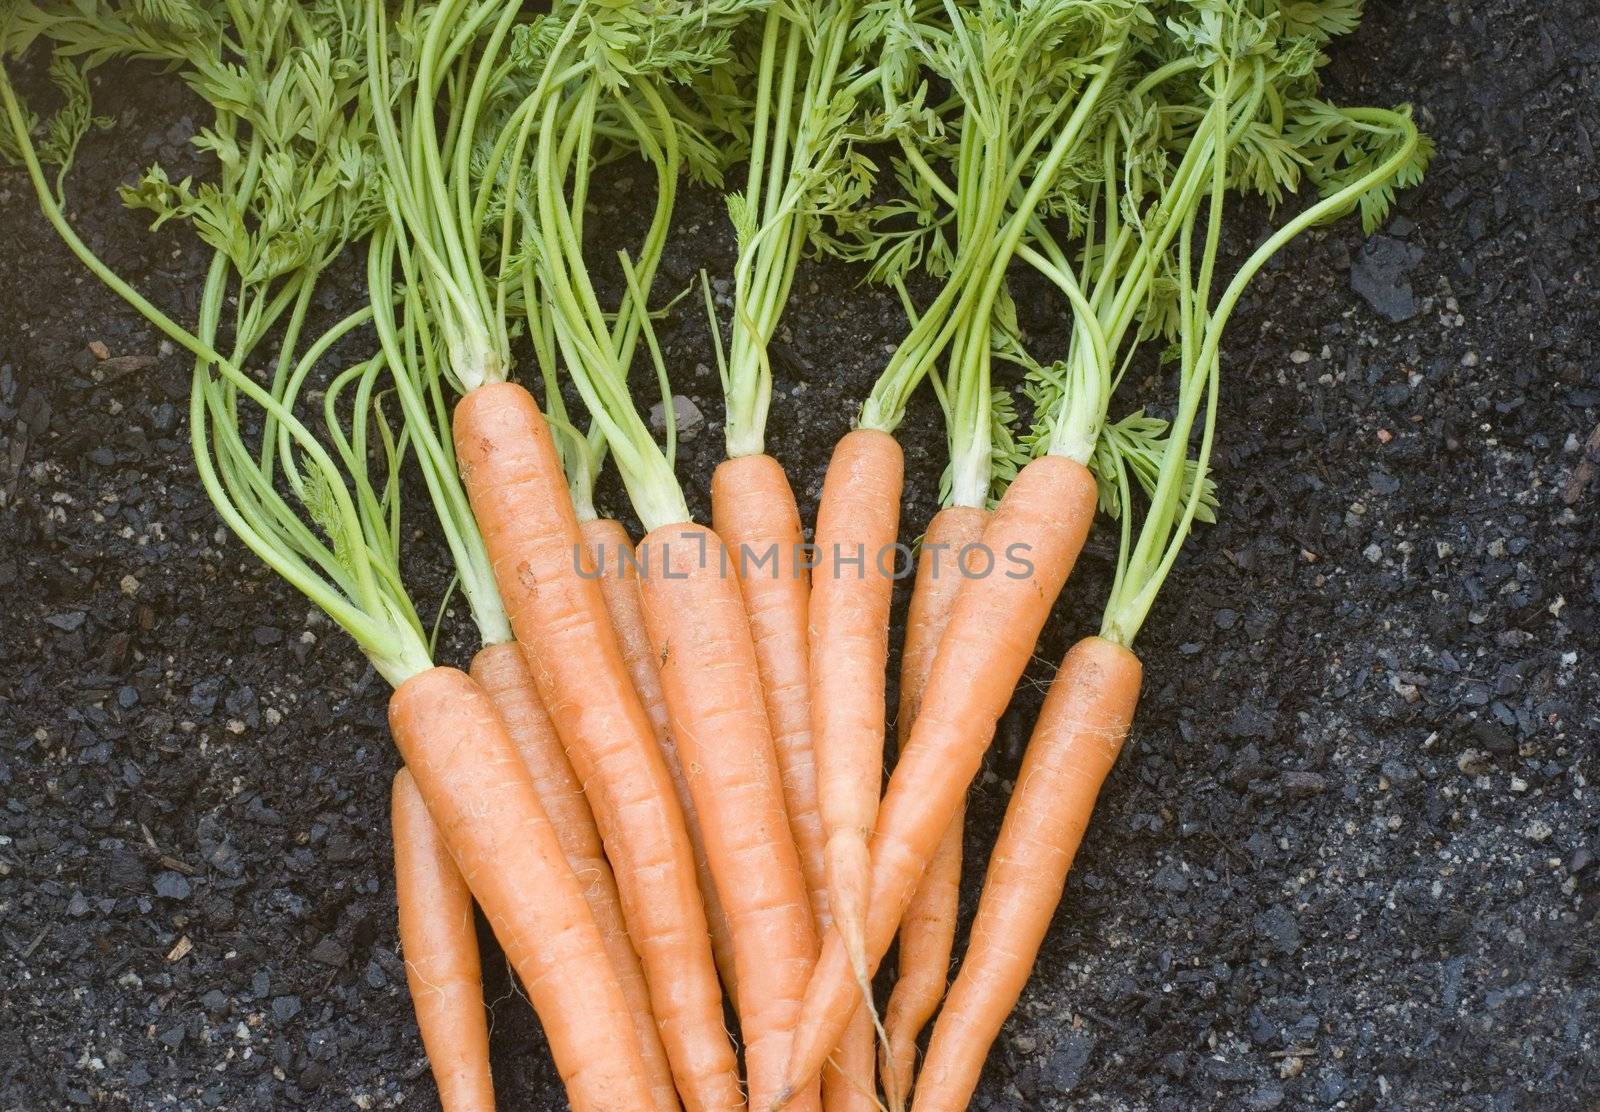 harvested carrots by stockarch